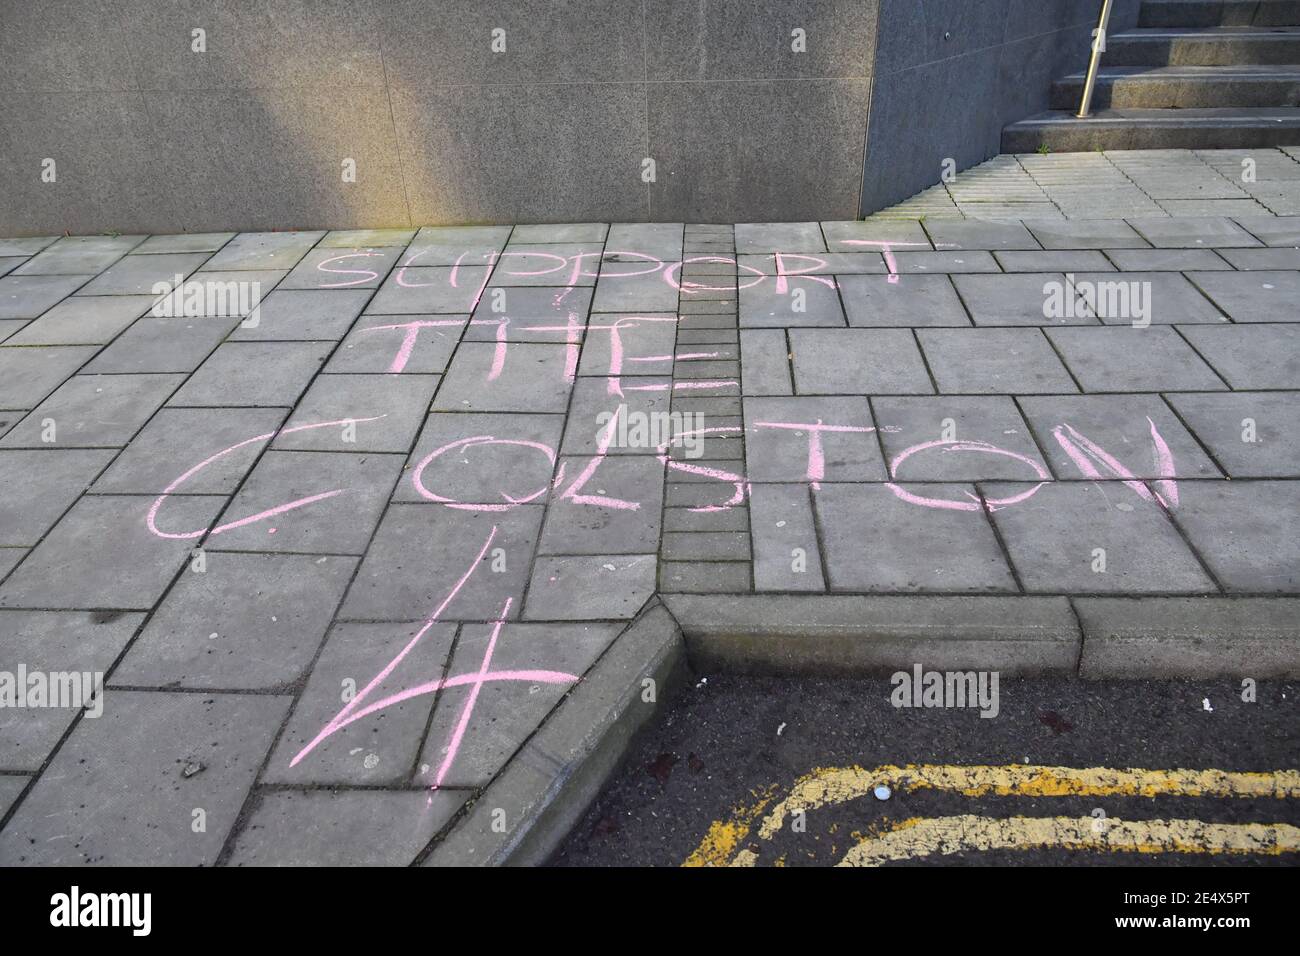 A woman writes 'Support the Colston 4' in chalk outside Bristol Magistrates' Court, where Rhian Graham, Milo Ponsford, Jake Skuse and Sage Willoughby are due to appear charged with criminal damage over the toppling of the Edward Colston statue in Bristol during the Black Lives Matter protests in June last year. Picture date: Monday January 25, 2021. Stock Photo